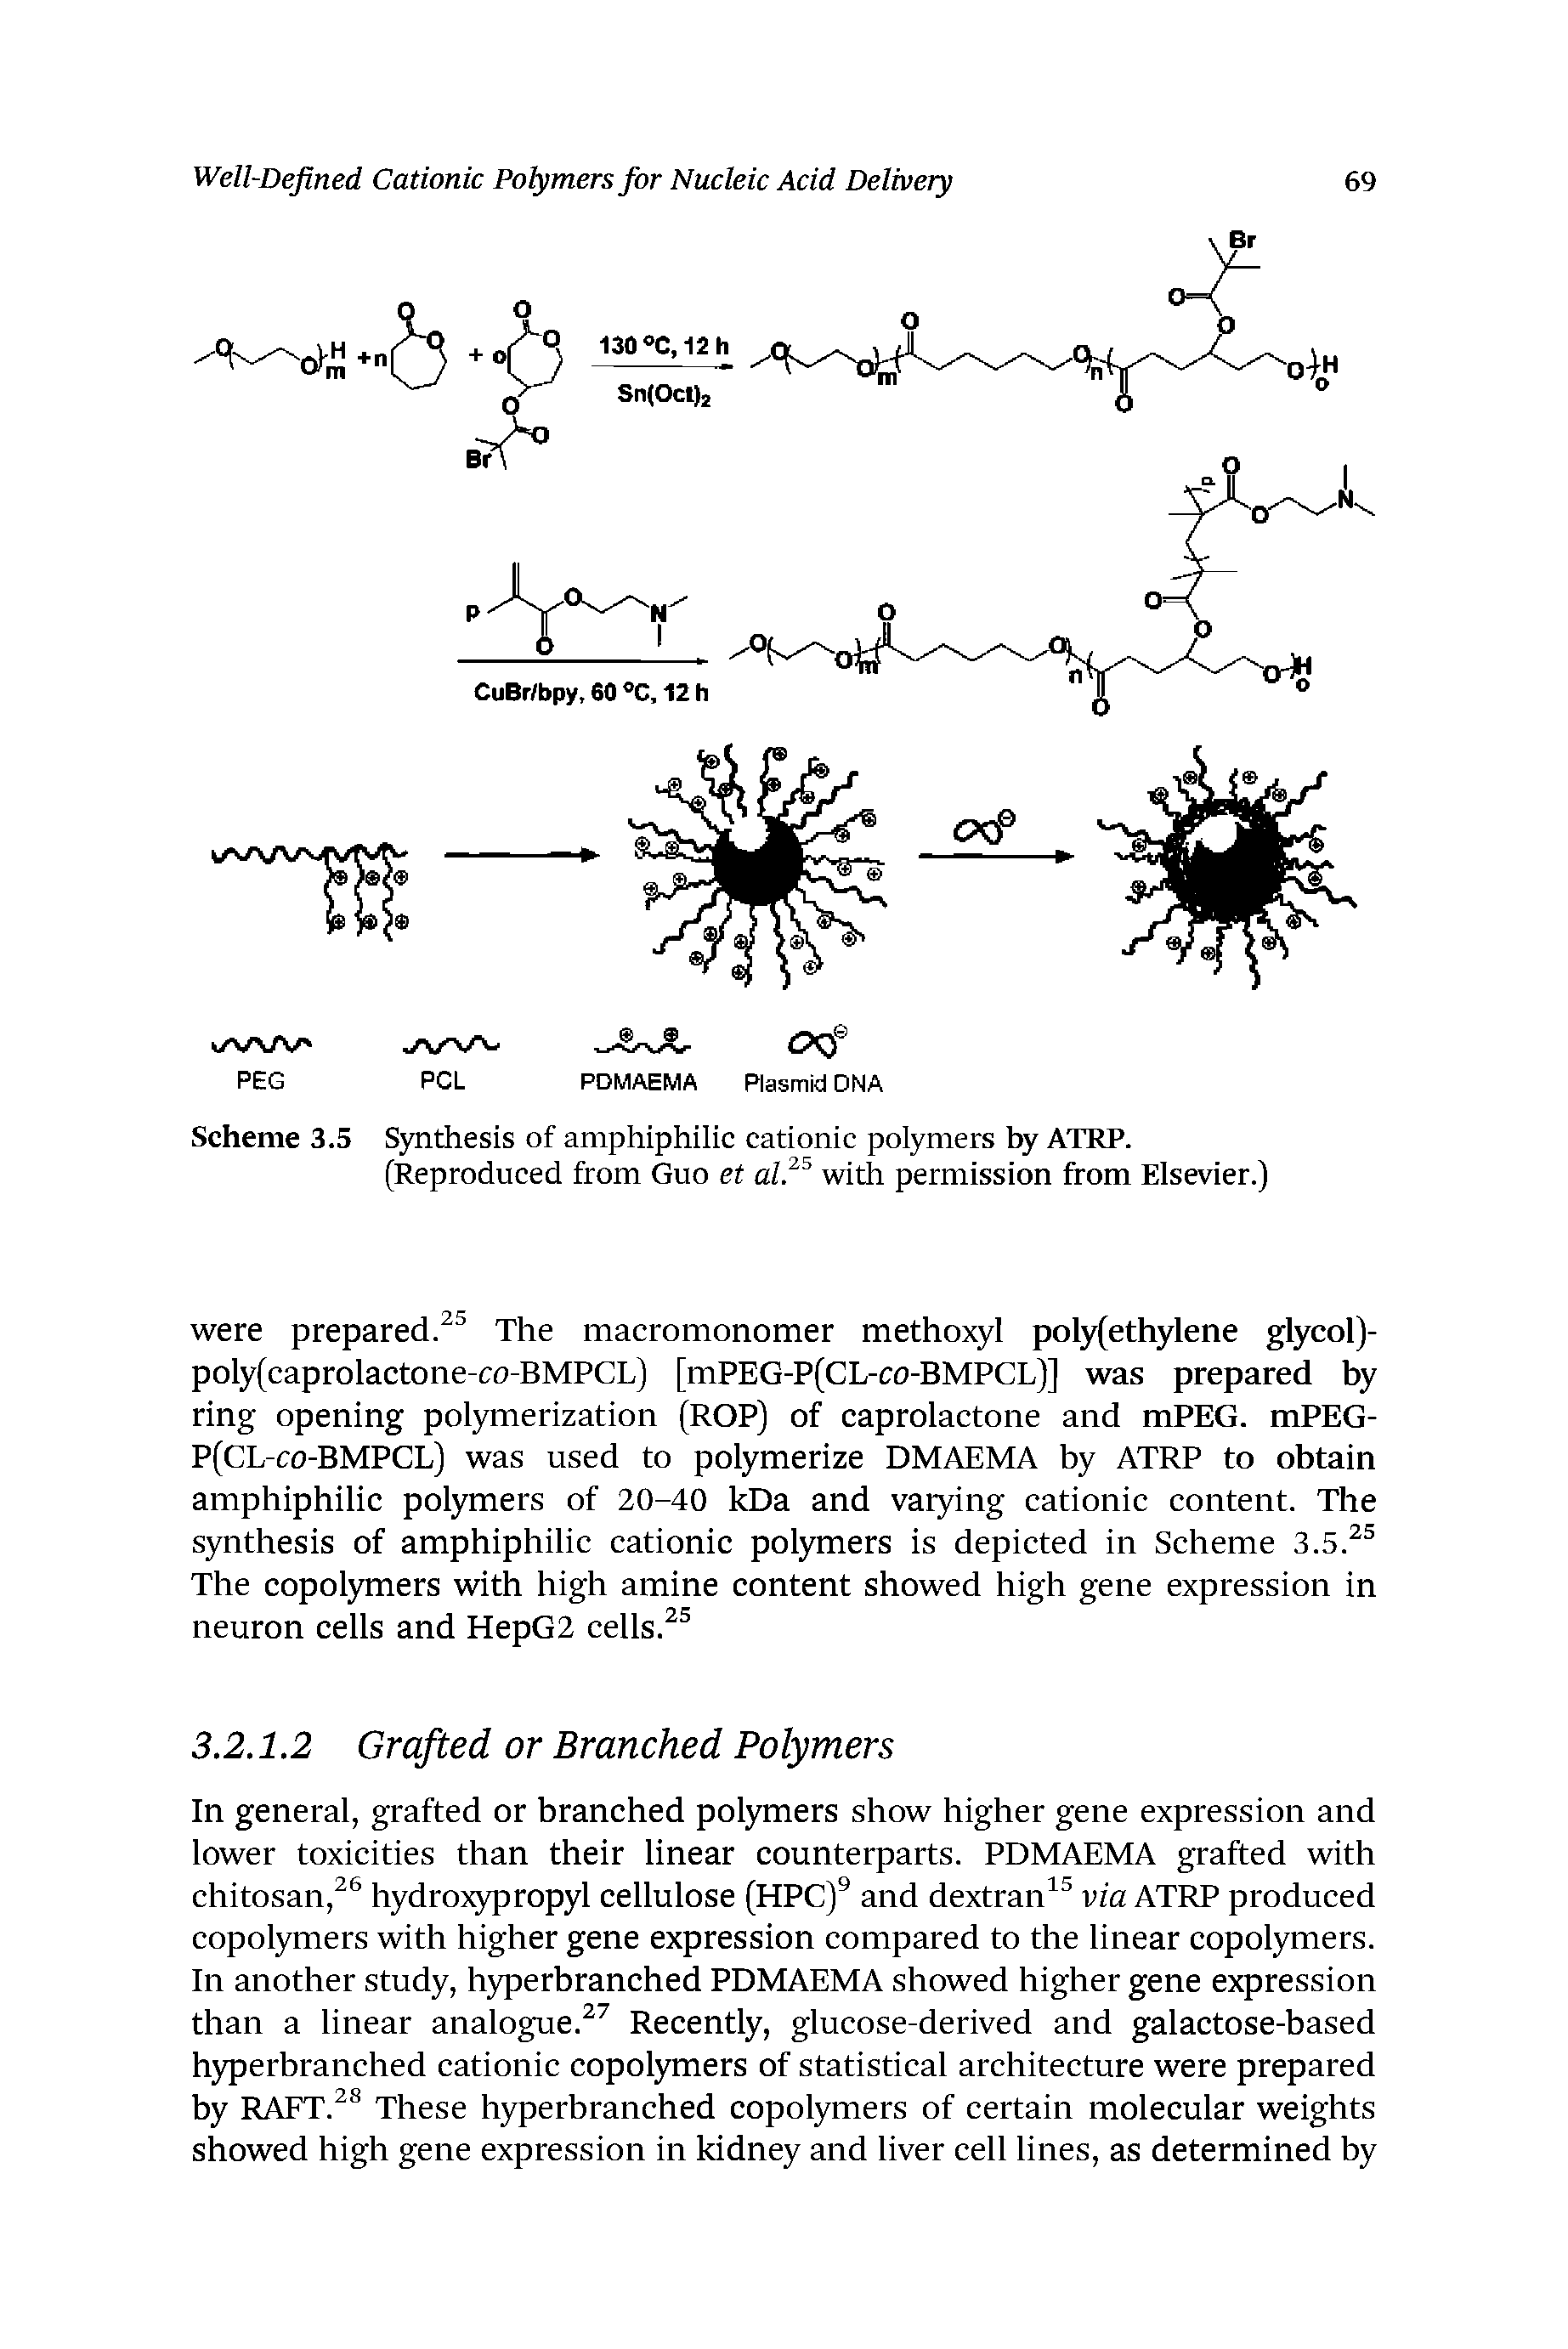 Scheme 3.5 Synthesis of amphiphilic cationic polymers ATRP.